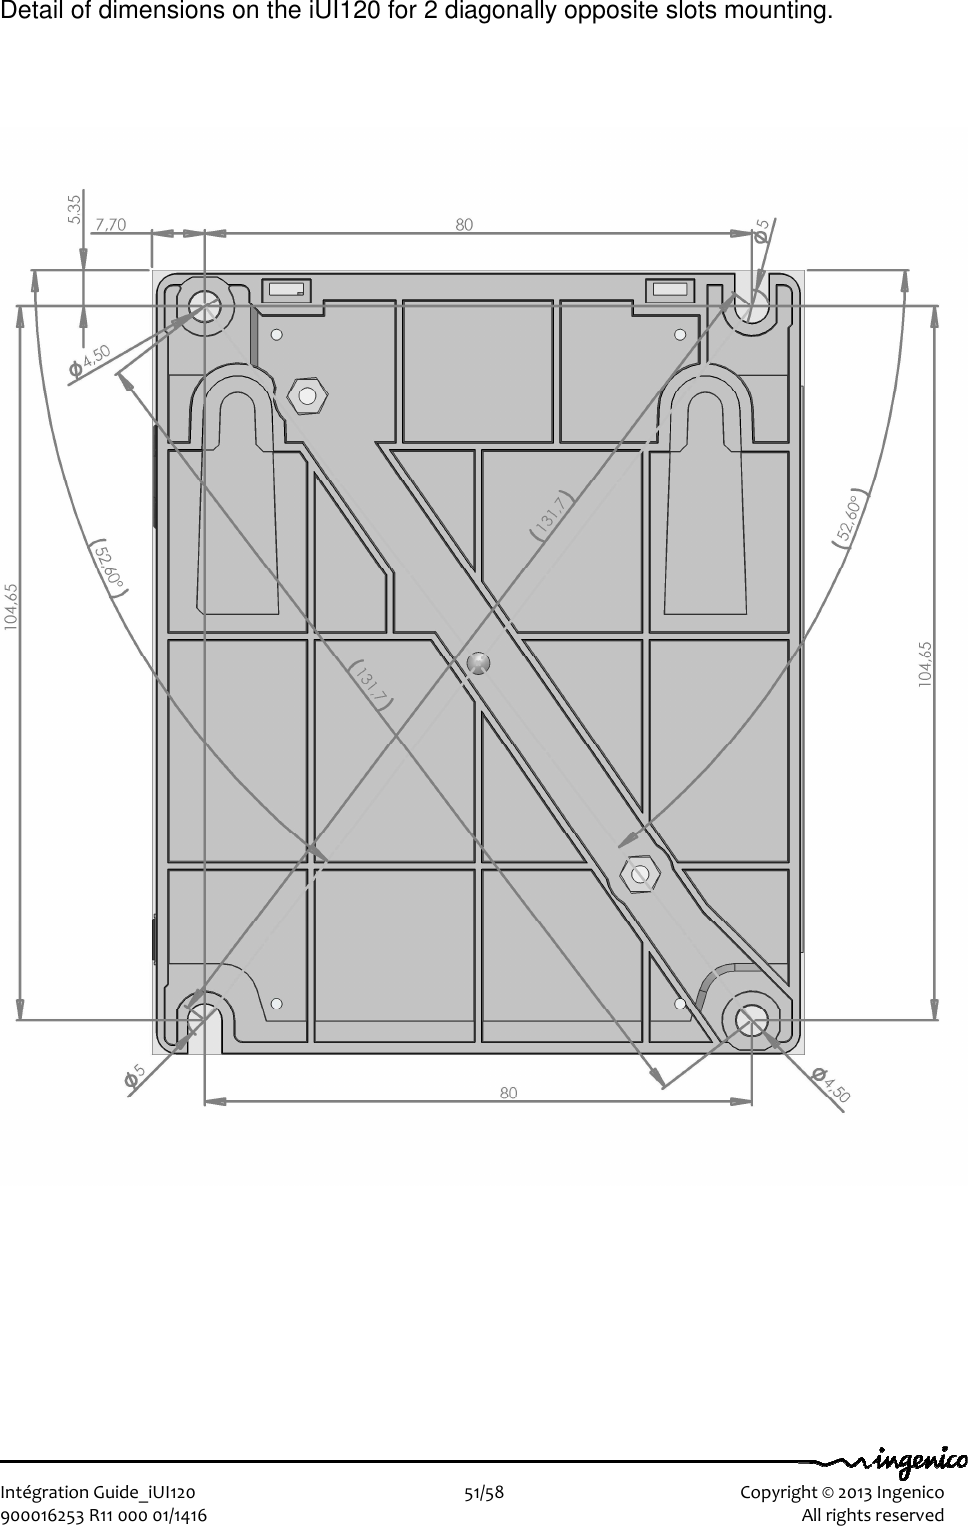   Intégration Guide_iUI120                        51/58    Copyright © 2013 Ingenico 900016253 R11 000 01/1416    All rights reserved Detail of dimensions on the iUI120 for 2 diagonally opposite slots mounting.          